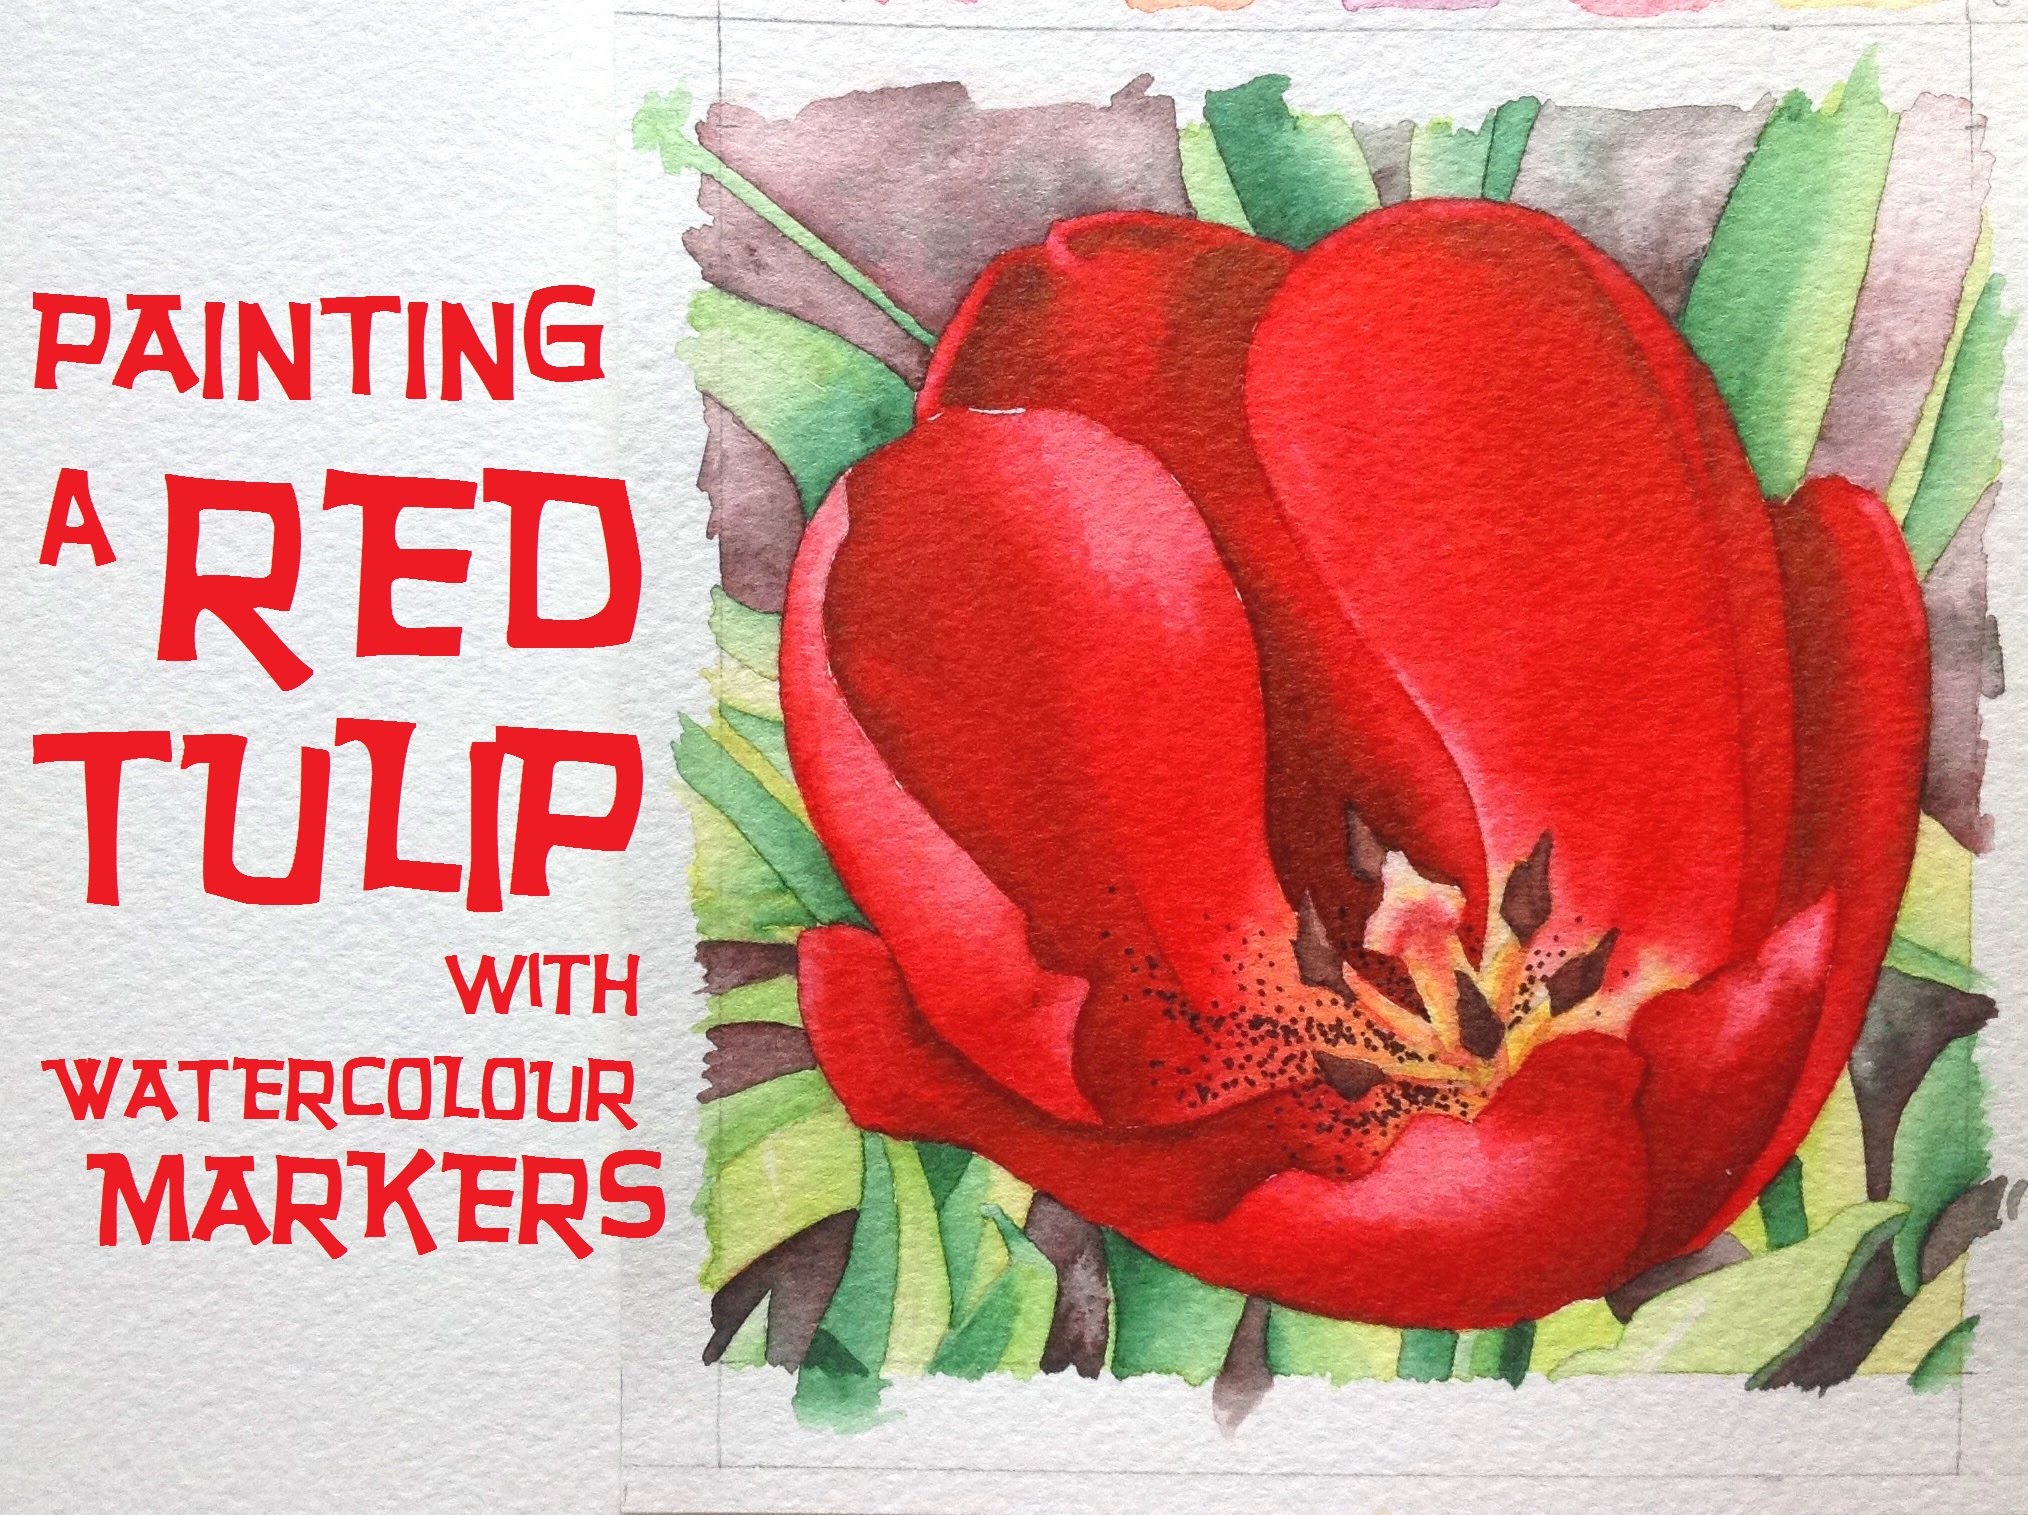 Aquamarkers: How to paint a Red Tulip - watercolour markers tutorial ...